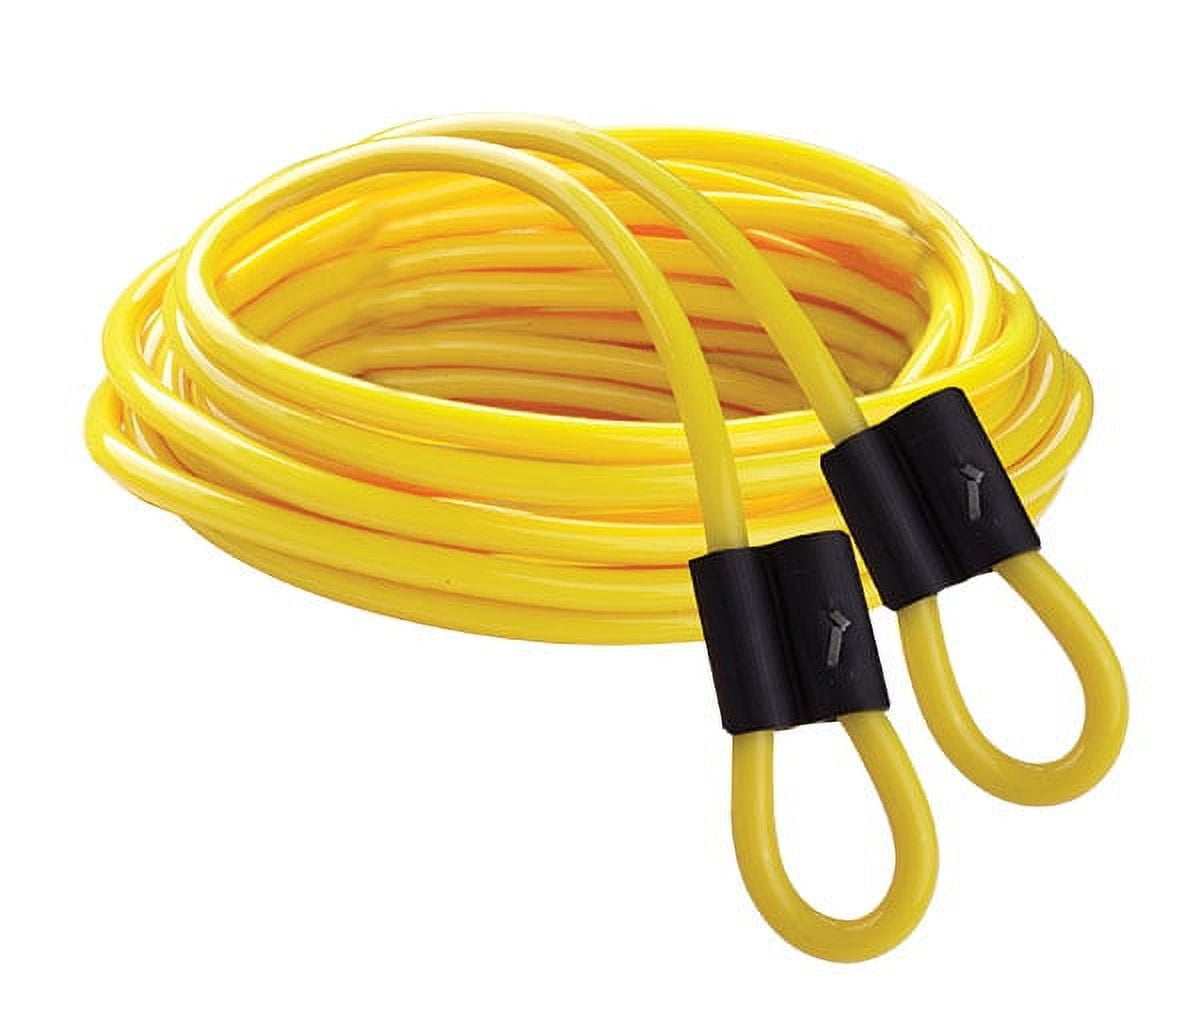 Picture of Champion Sports DD12 12 in. Double Dutch Licorice Speed Rope, Yellow